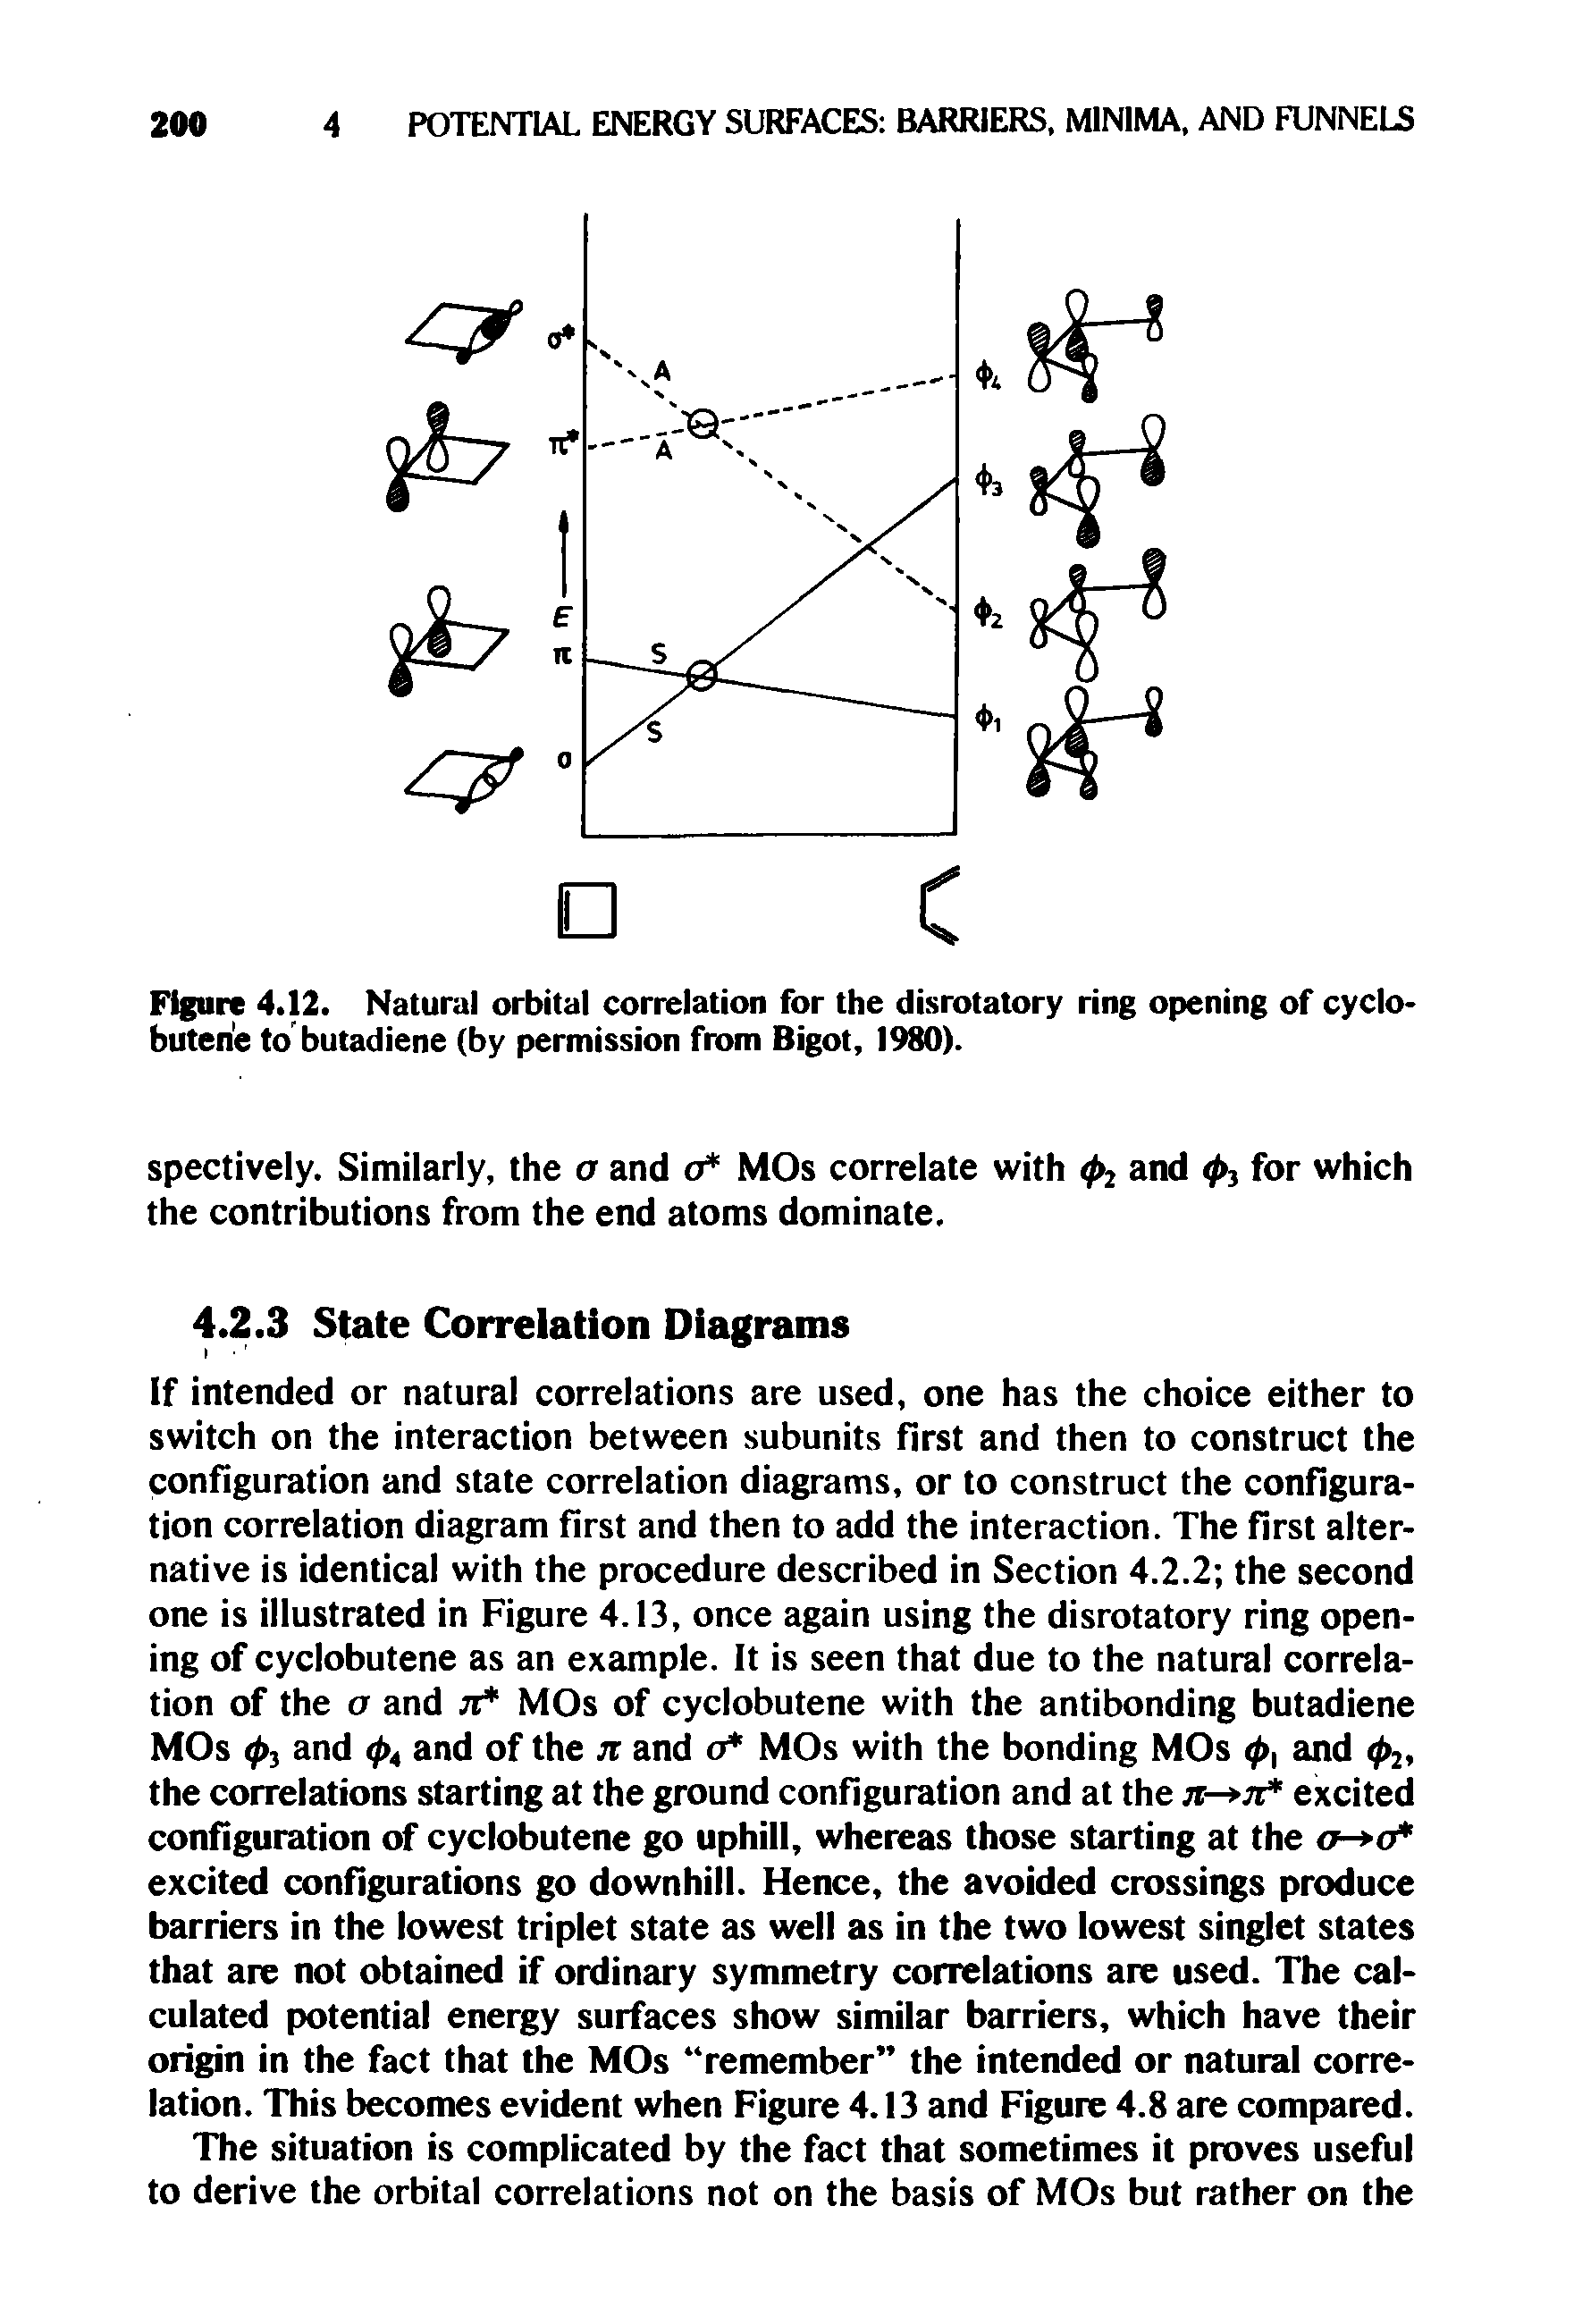 Figure 4.12. Natural orbital correlation for the disrotatory ring opening of cyclo-buten e to butadiene (by permission from Bigot, 1980).